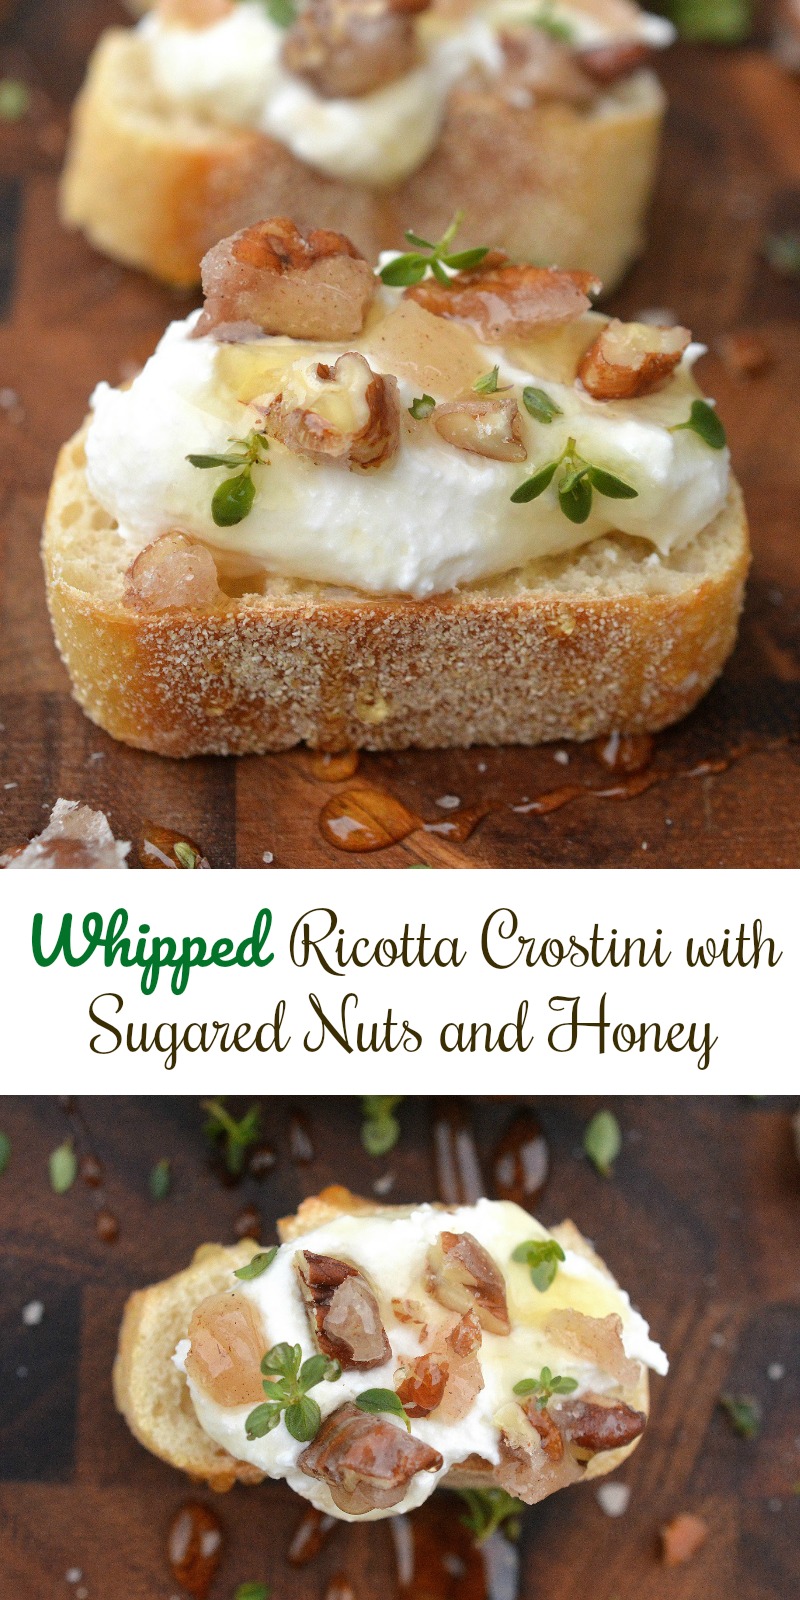 Whipped Ricotta Crostini's are sophisticated, scrumptious and make a fantastic addition to a cheese or charcuterie board or dessert!